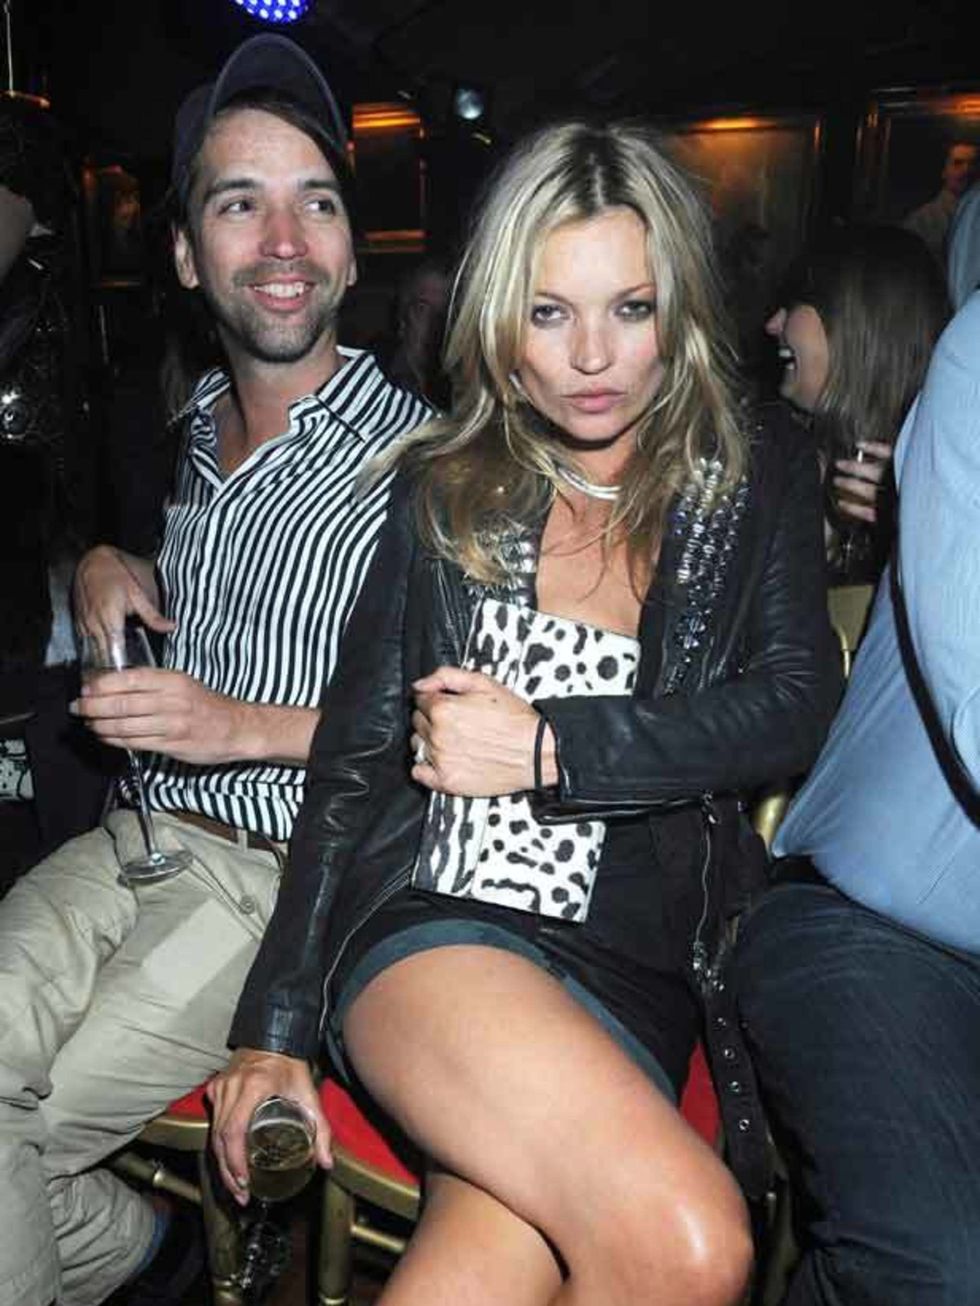 <p><a href="http://www.elleuk.com/starstyle/style-files/(section)/Kate-Moss">Kate Moss</a> channels trademark rock chick with studded leather and animal print for the Lady Gaga special performance at Annabel's in London, May 2011.</p>